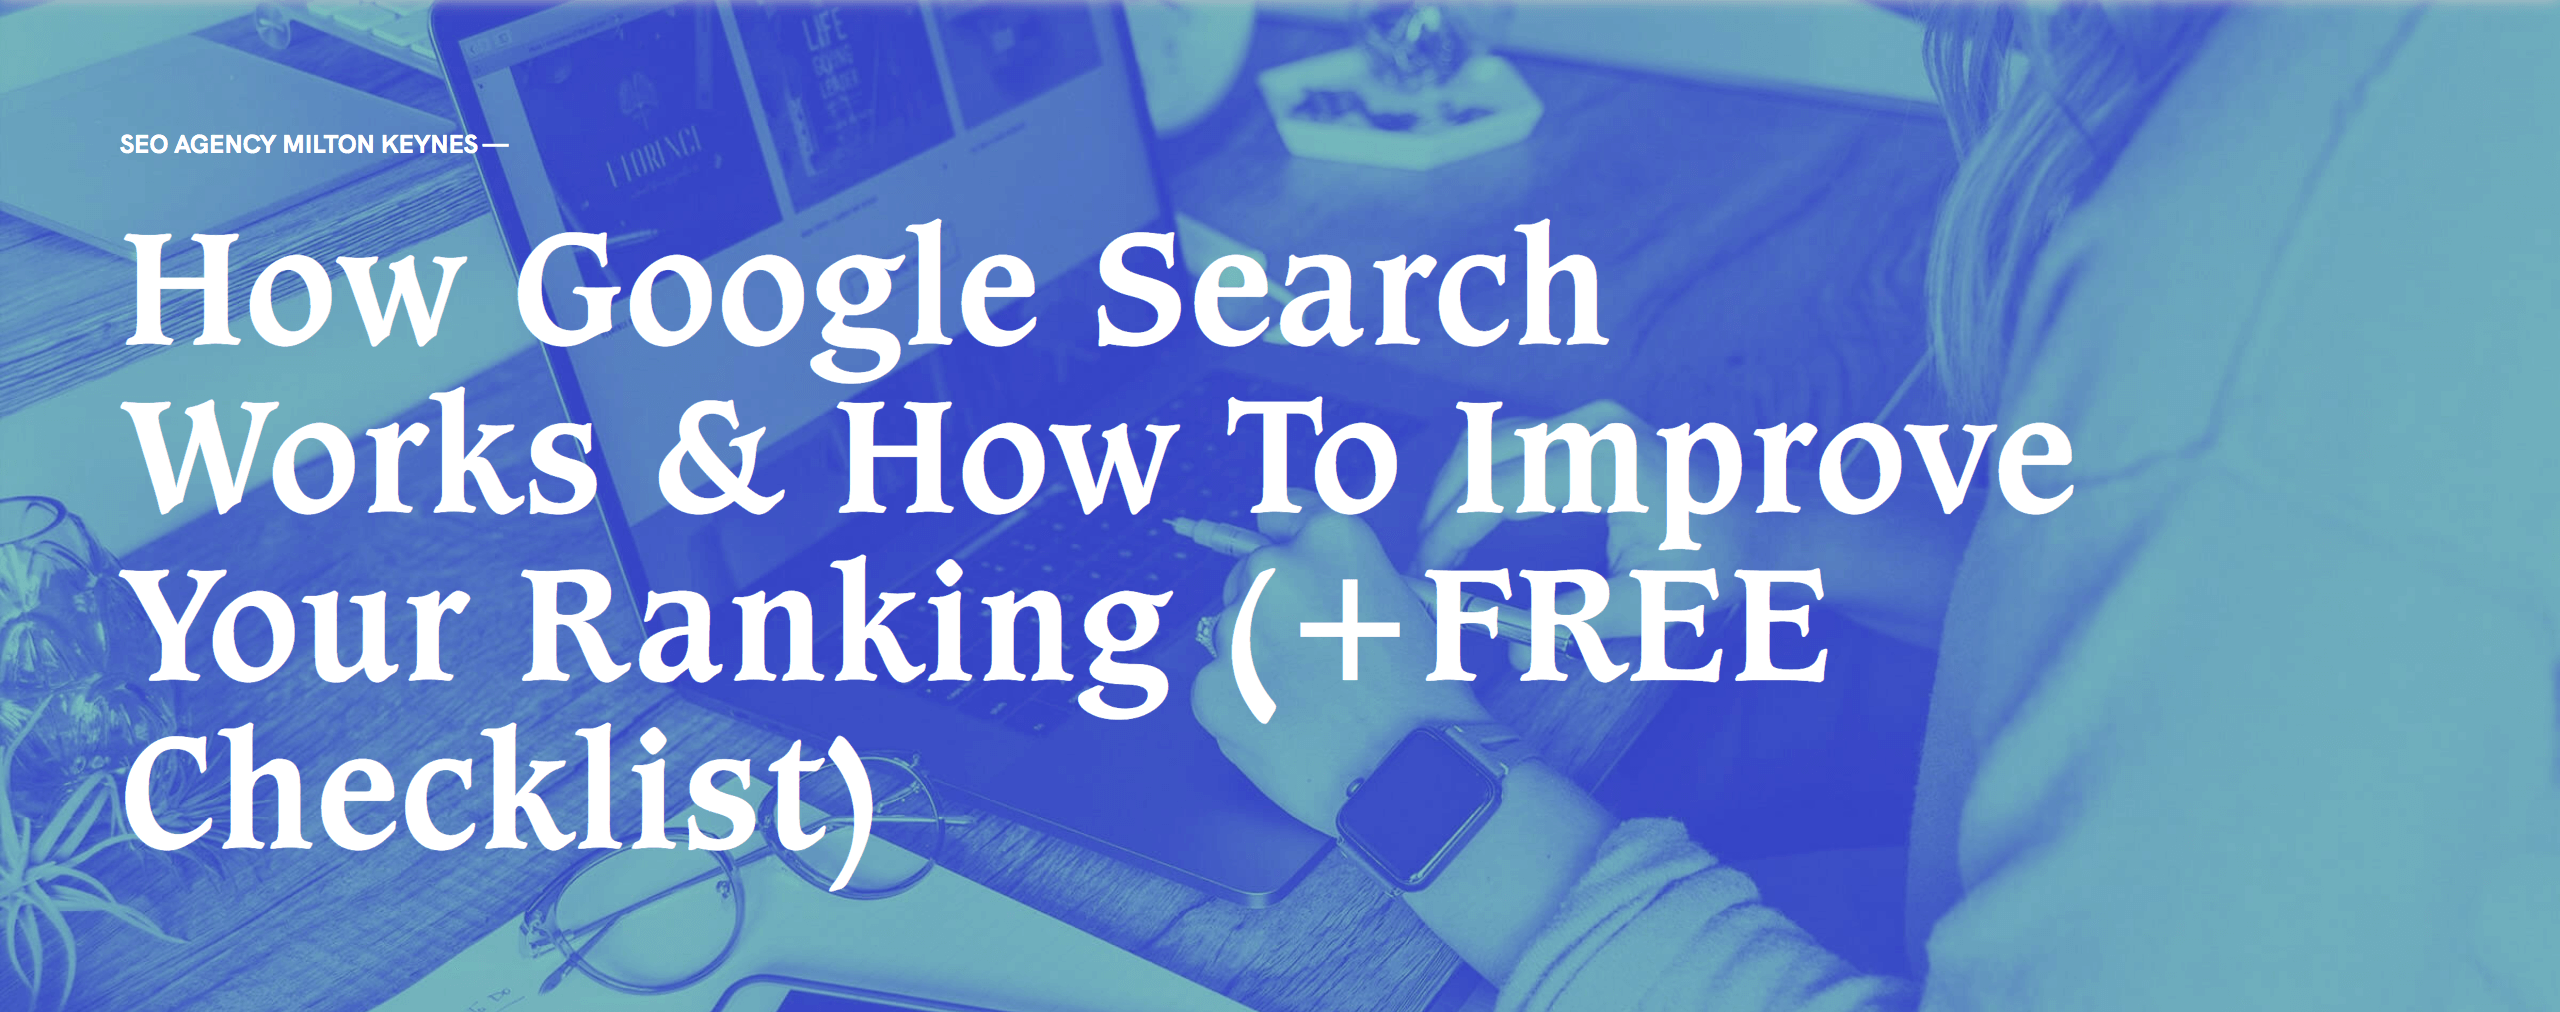 How google search works heading image